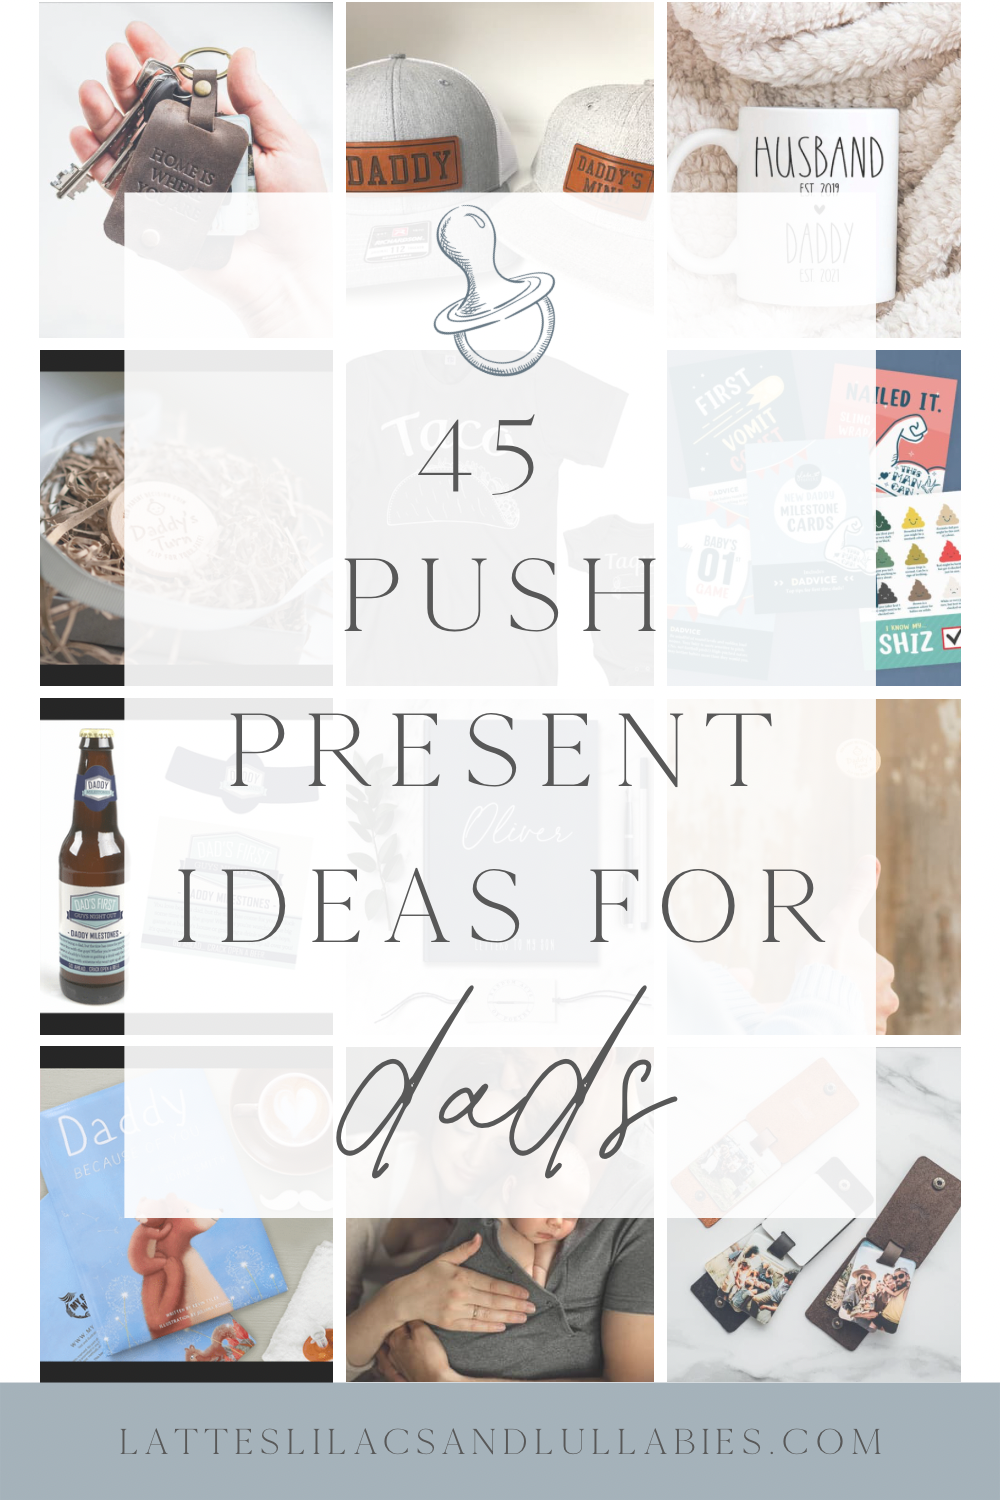 Push Presents for Dad